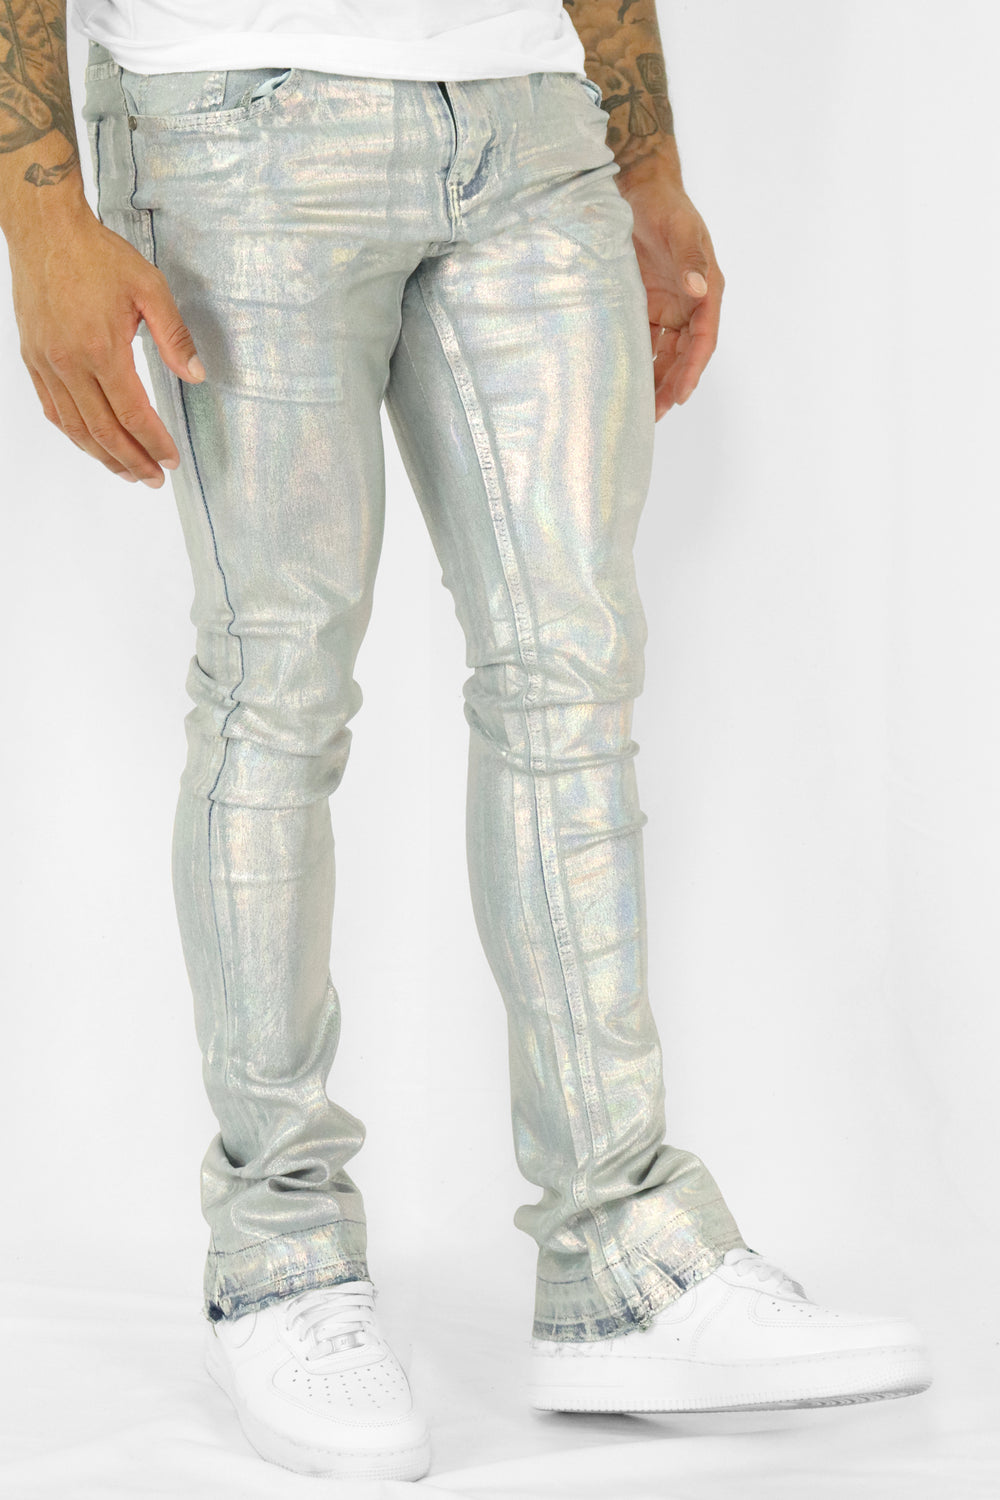 Side Chain Hollow Out Jeans Street Wear Pants JKP4332  Jeans with chains,  Jeans with chains on the side, Fashion boutique